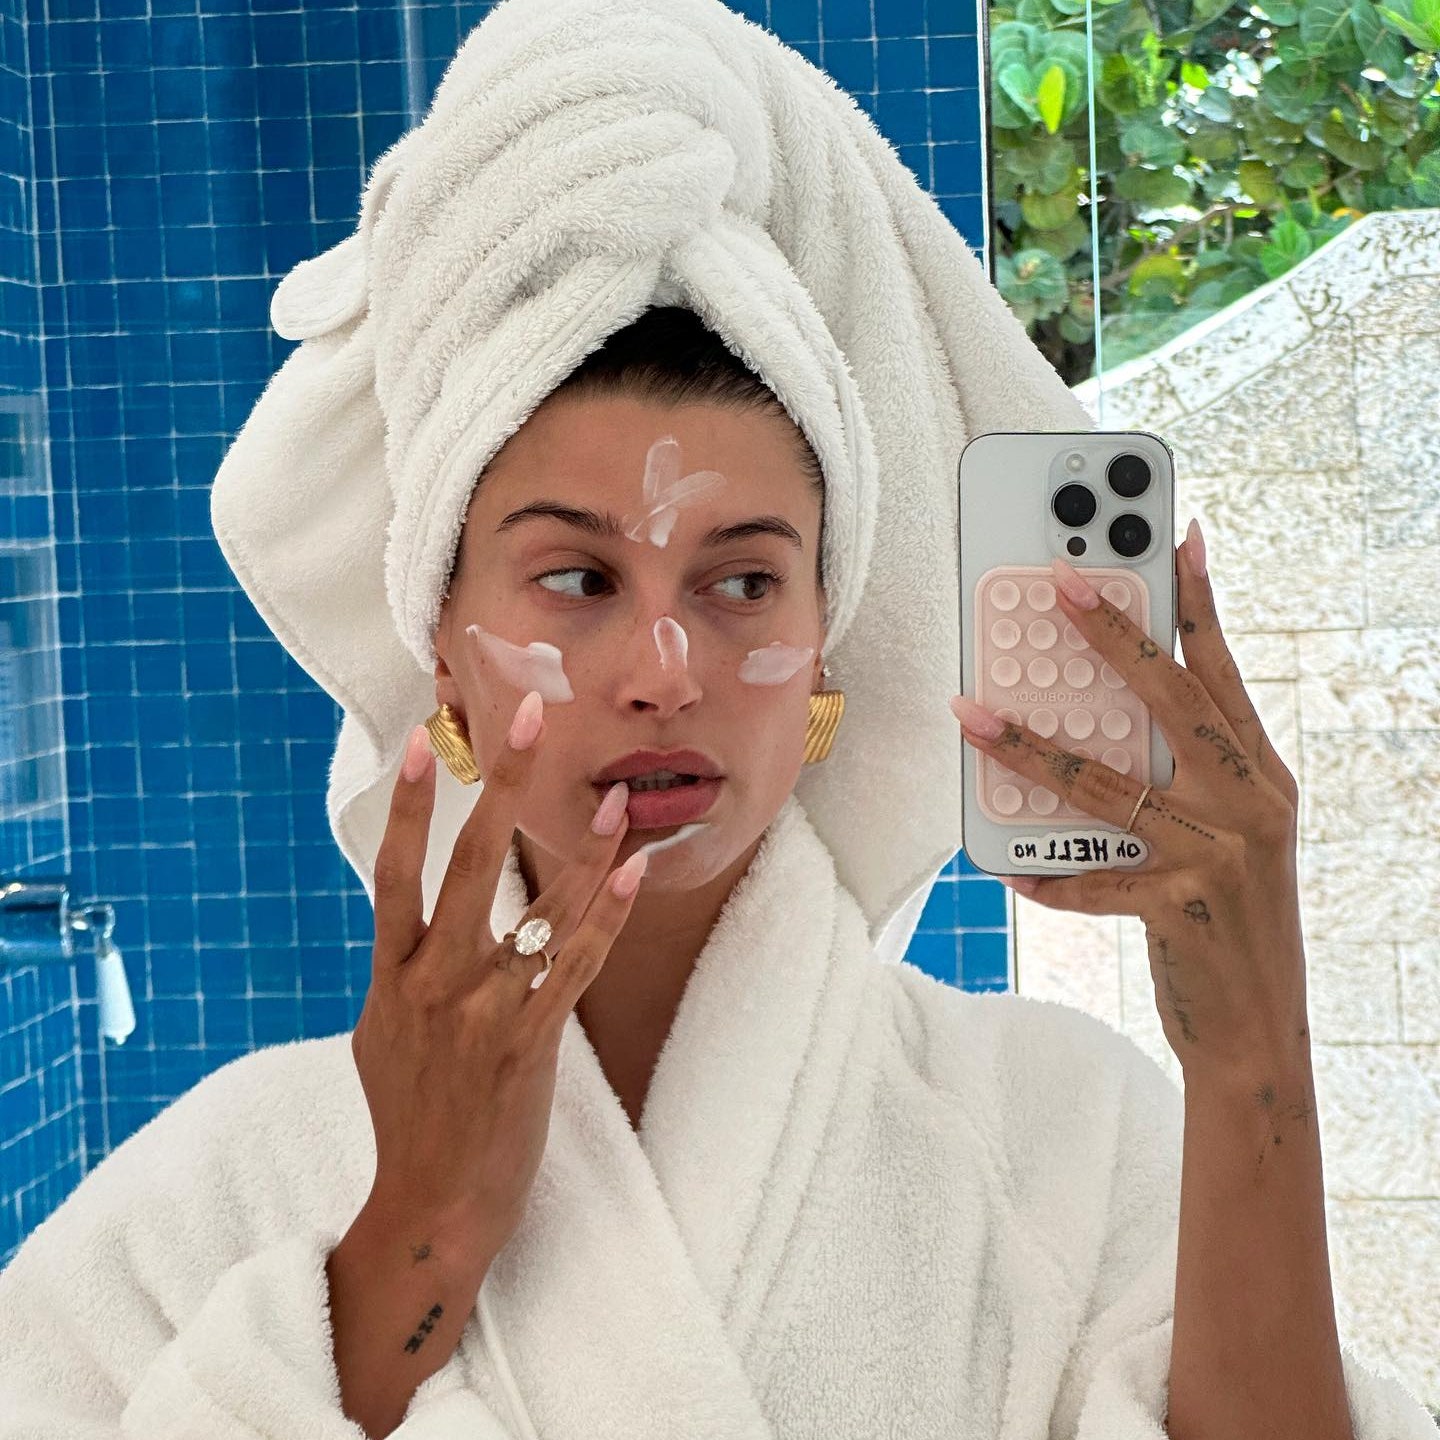 Hailey Bieber Says This $45 Moisturizer Is a “Life-Saver”